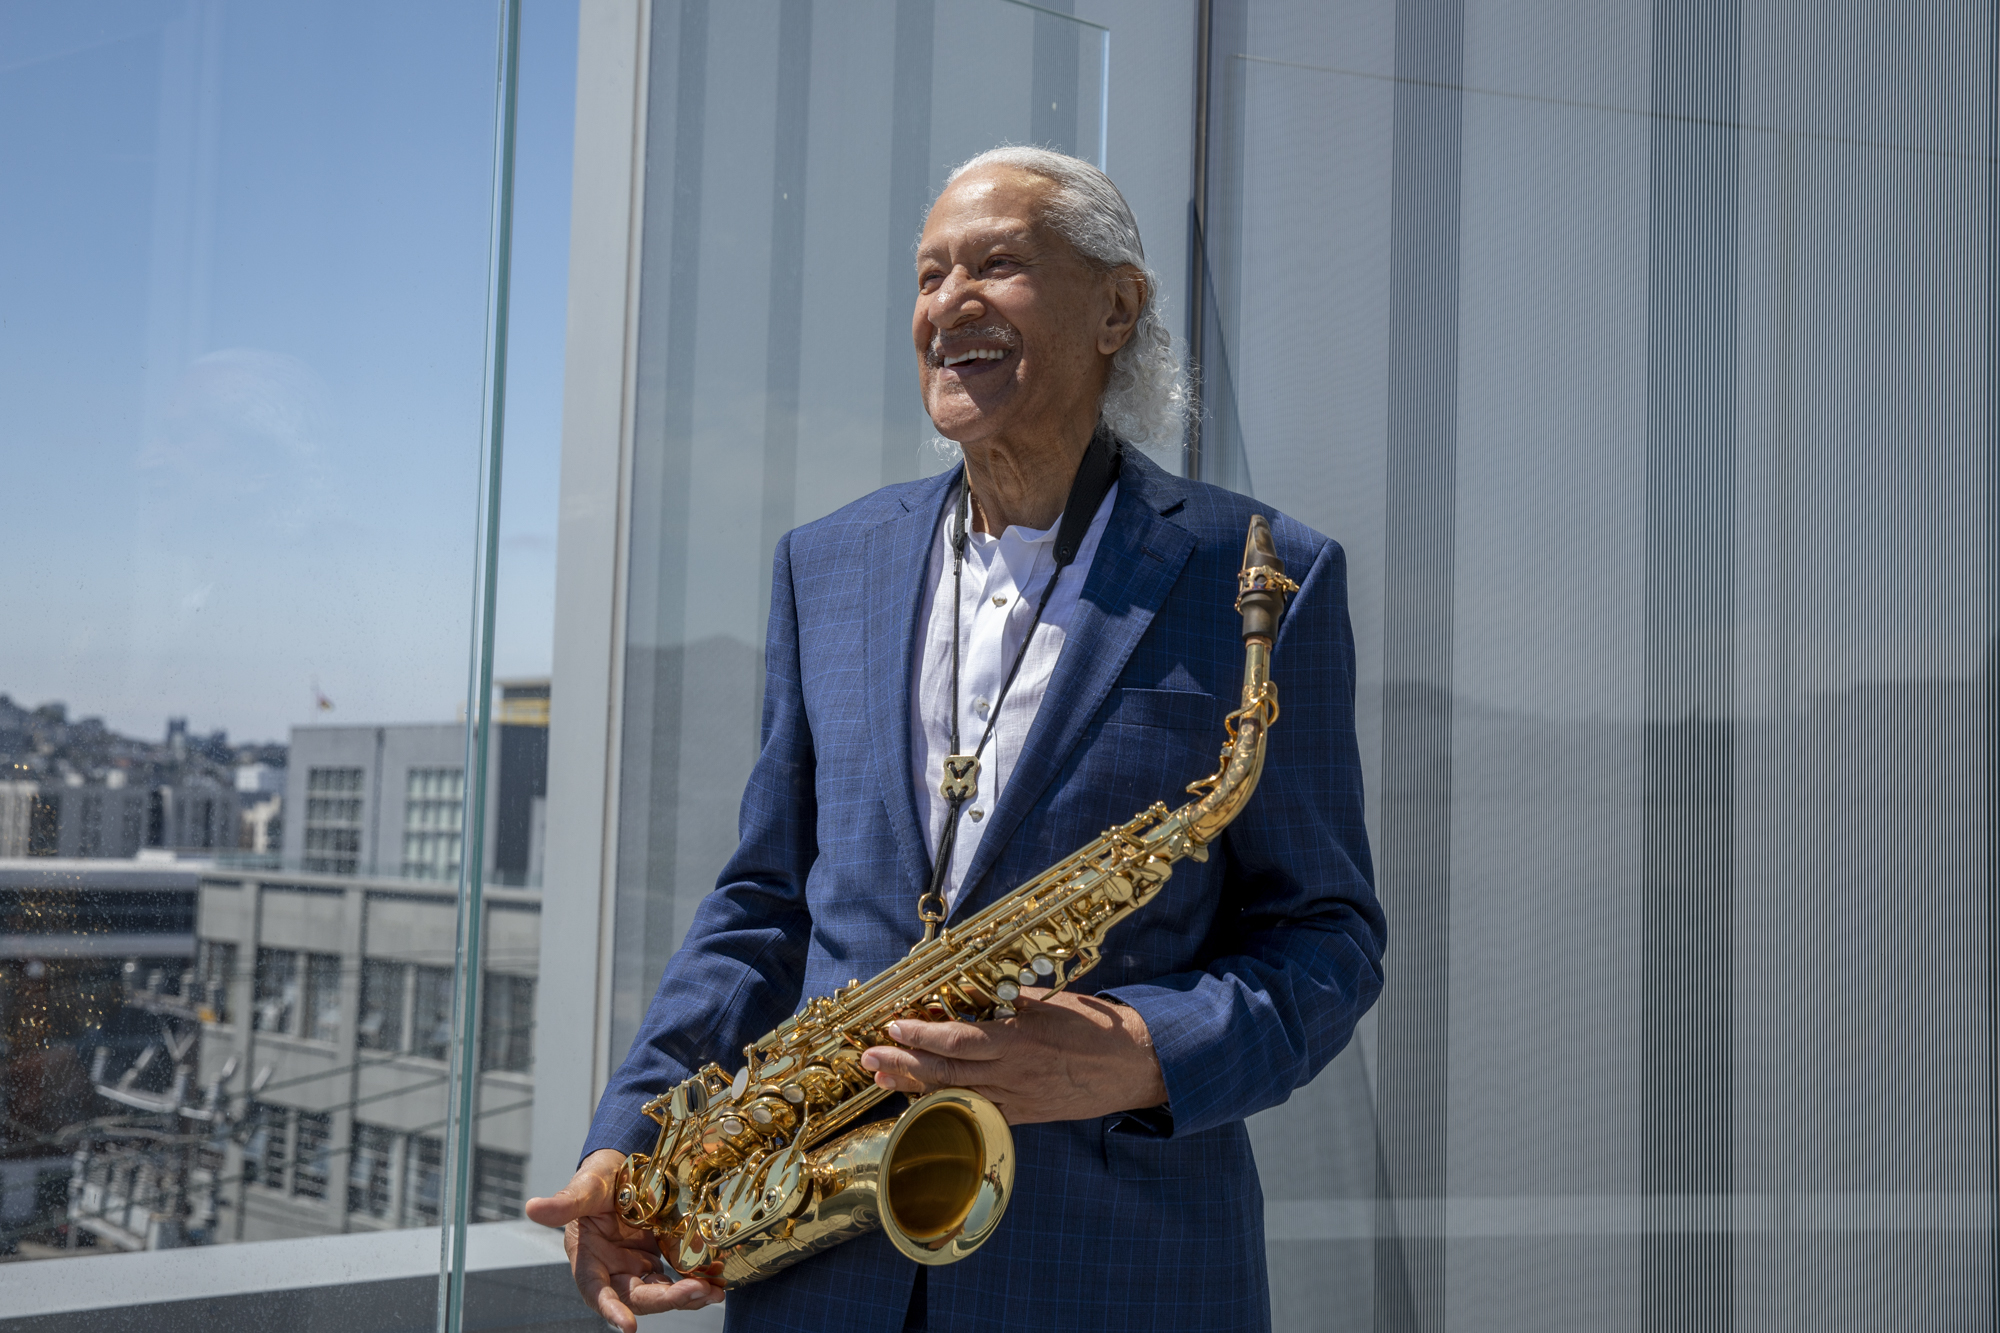 Gary Bartz poses for a portrait with his saxophone